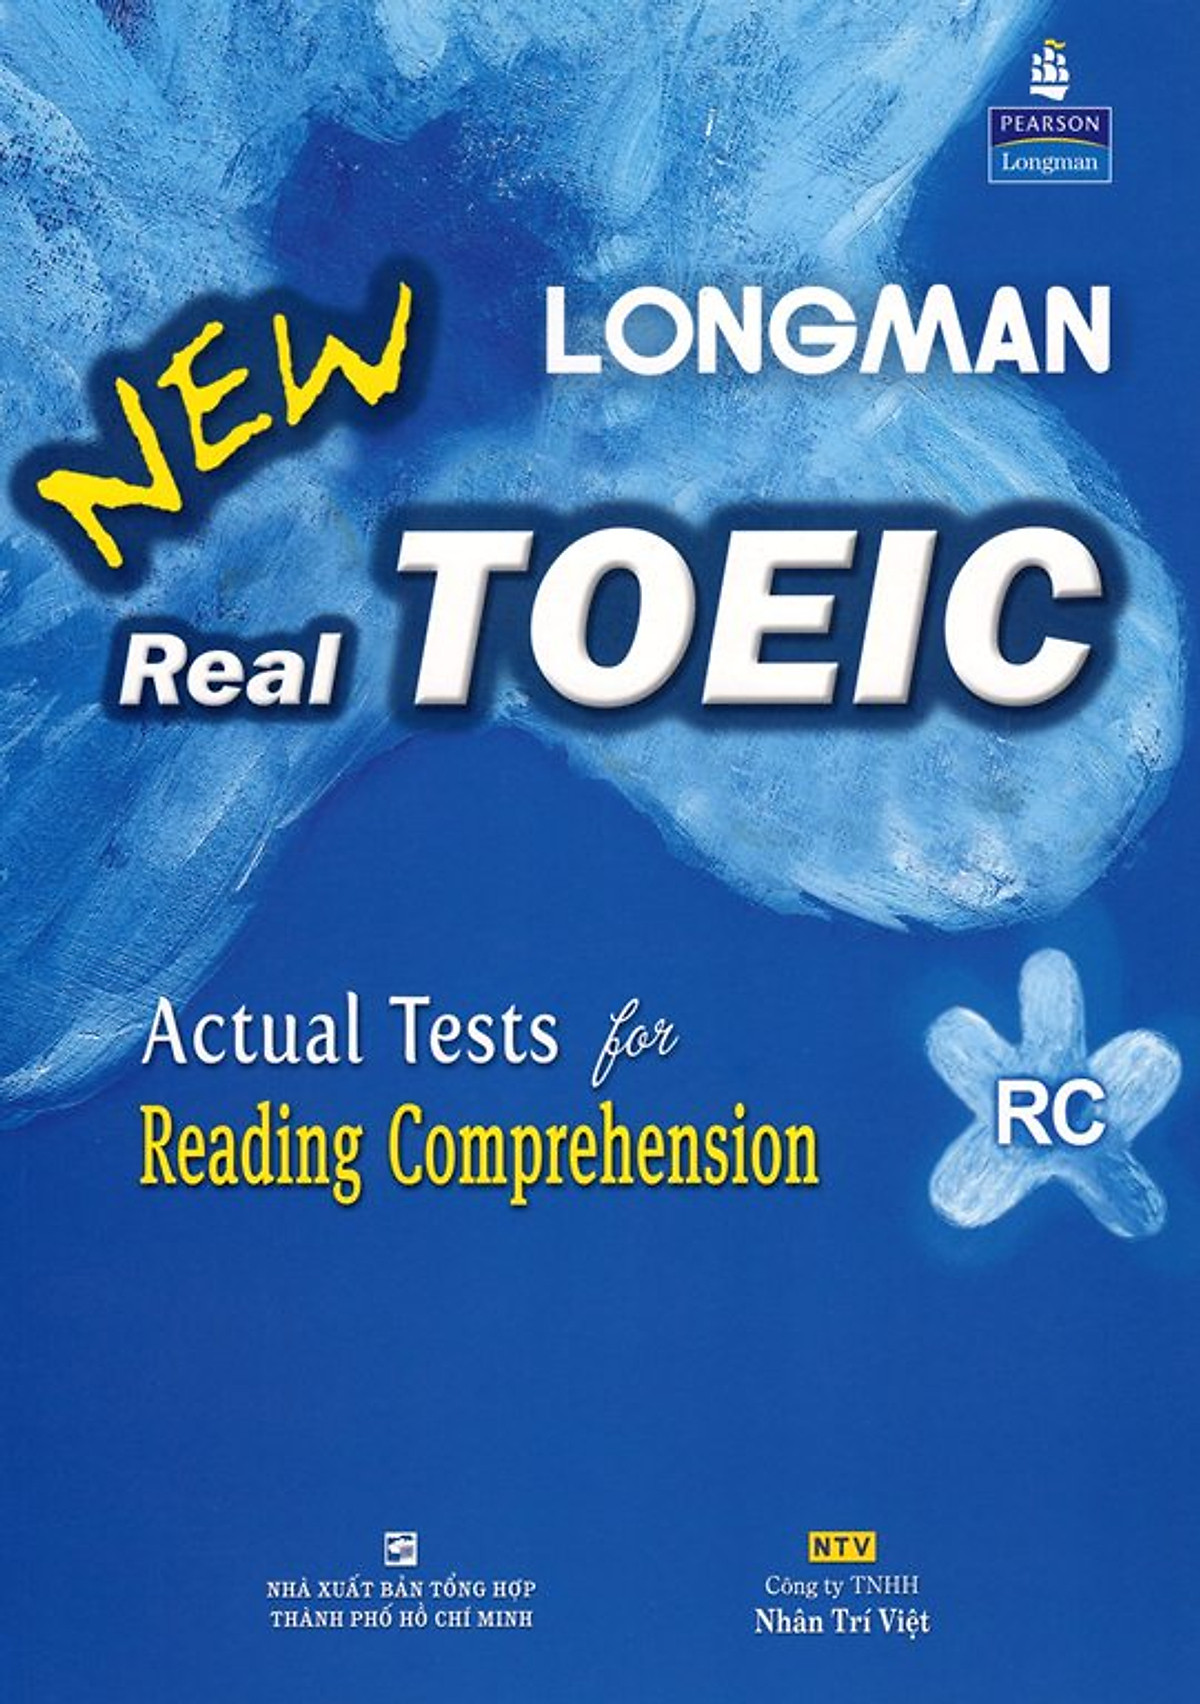 New Longman Real Toeic - Actual Tests For Reading Comprehension 